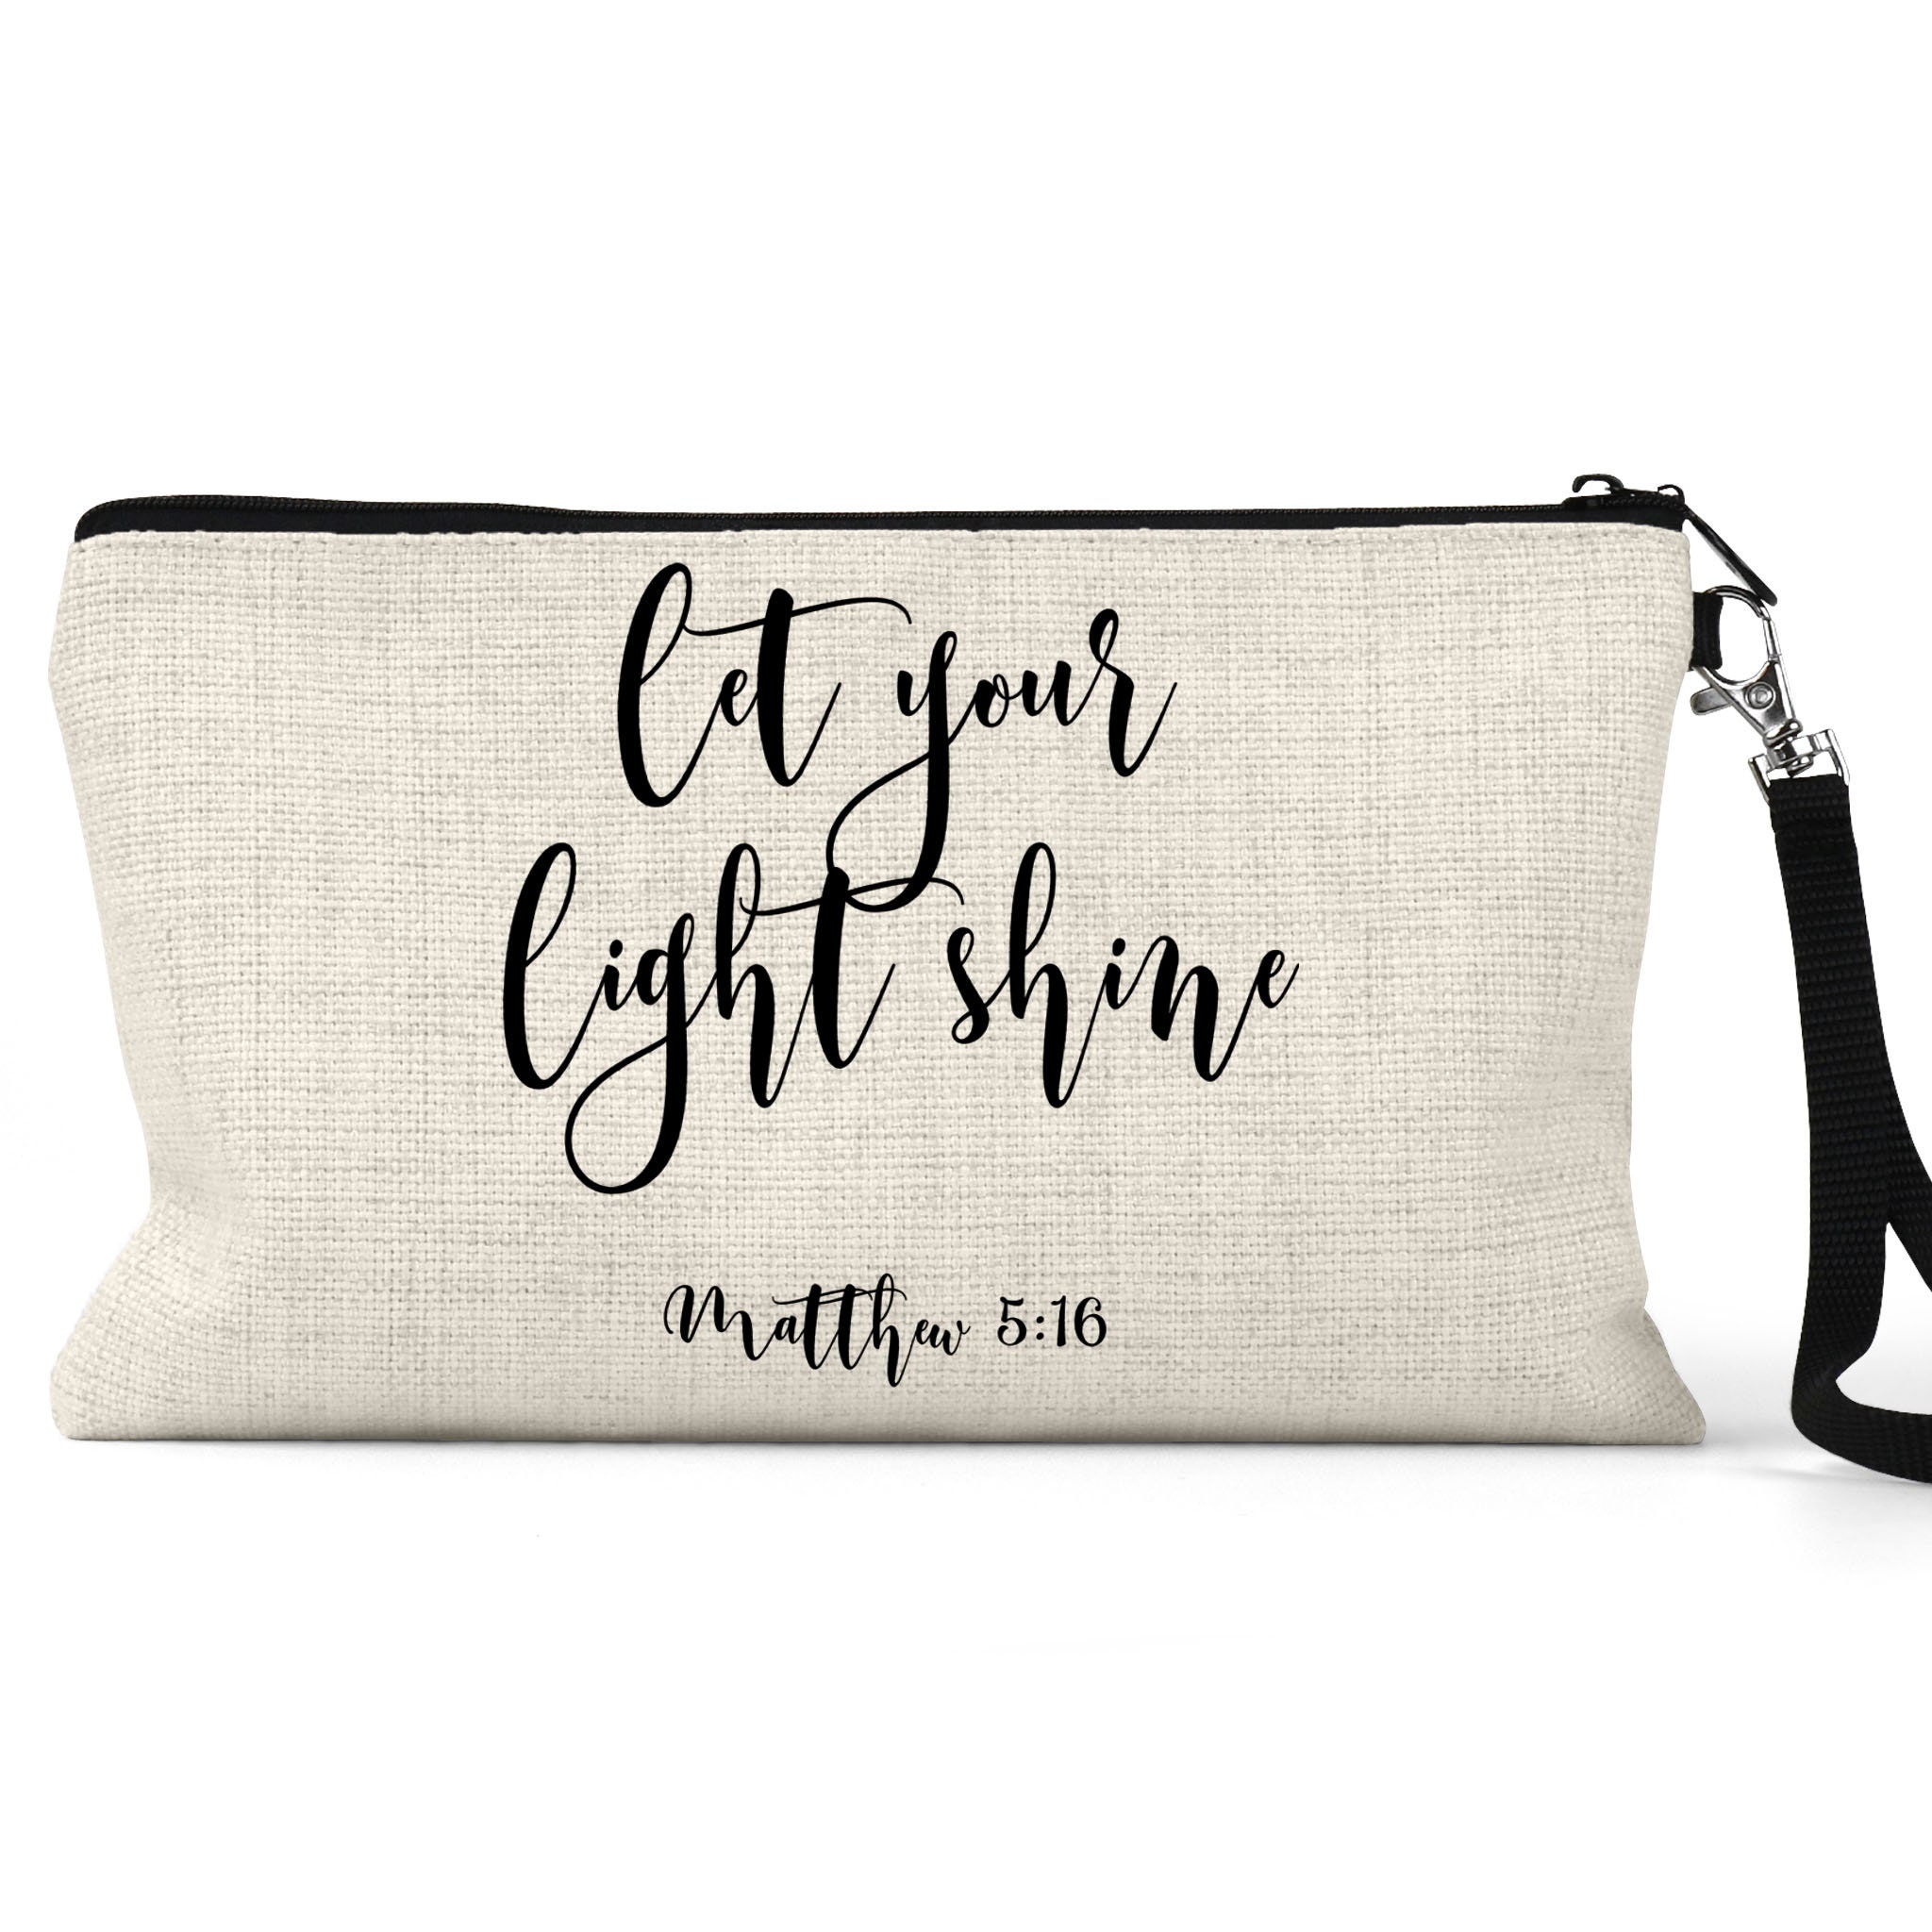 Born2Calm Christian Gifts for Women - Spacious Pencil Case Bag for Women  for All Your Bible Study Supplies Tools - Durable and Portable Pouch for